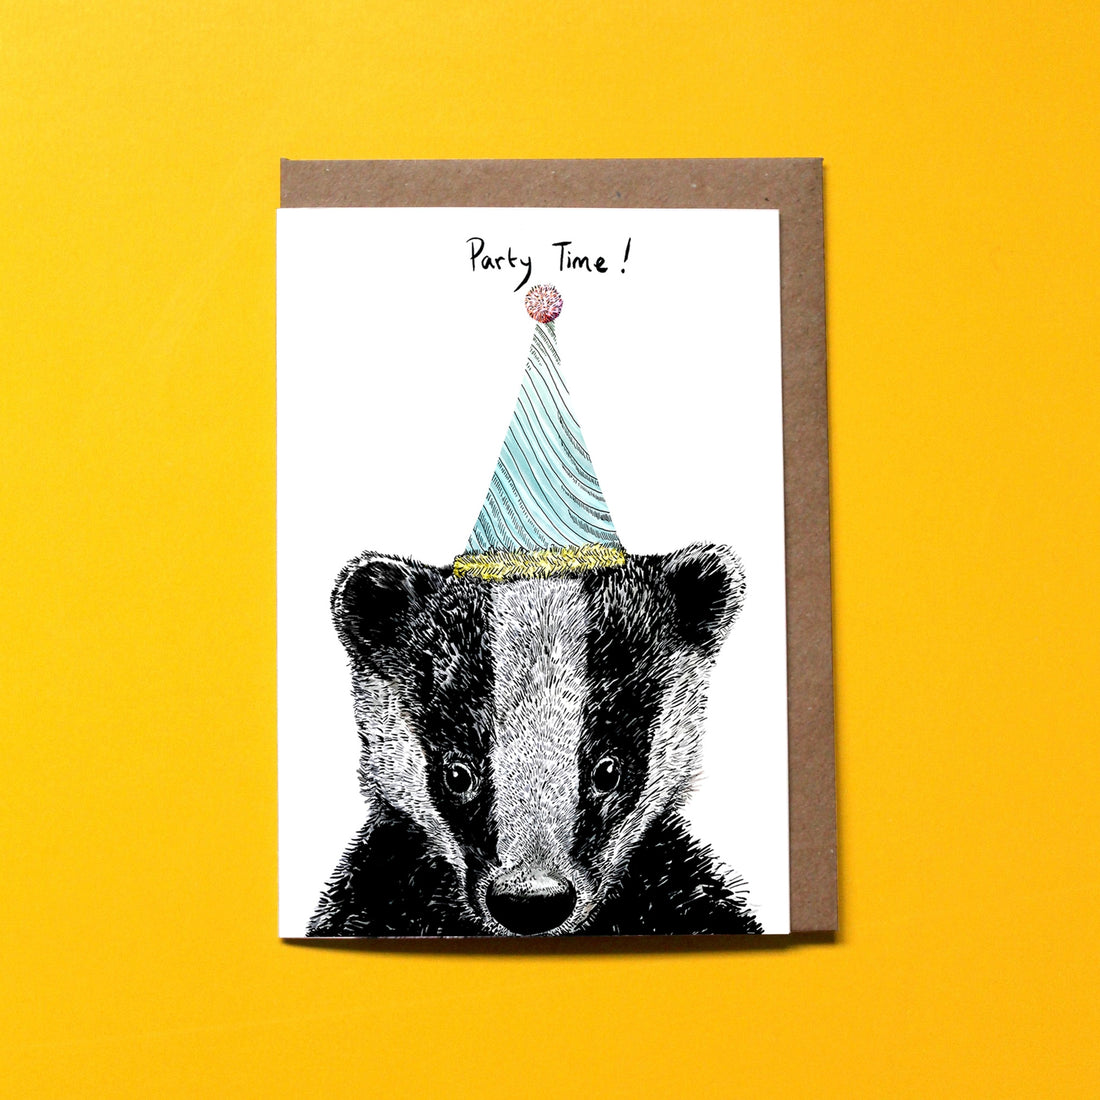 A Party Animal Birthday Card from Max Made Me featuring a highly detailed illustration of a badger in a party hat.